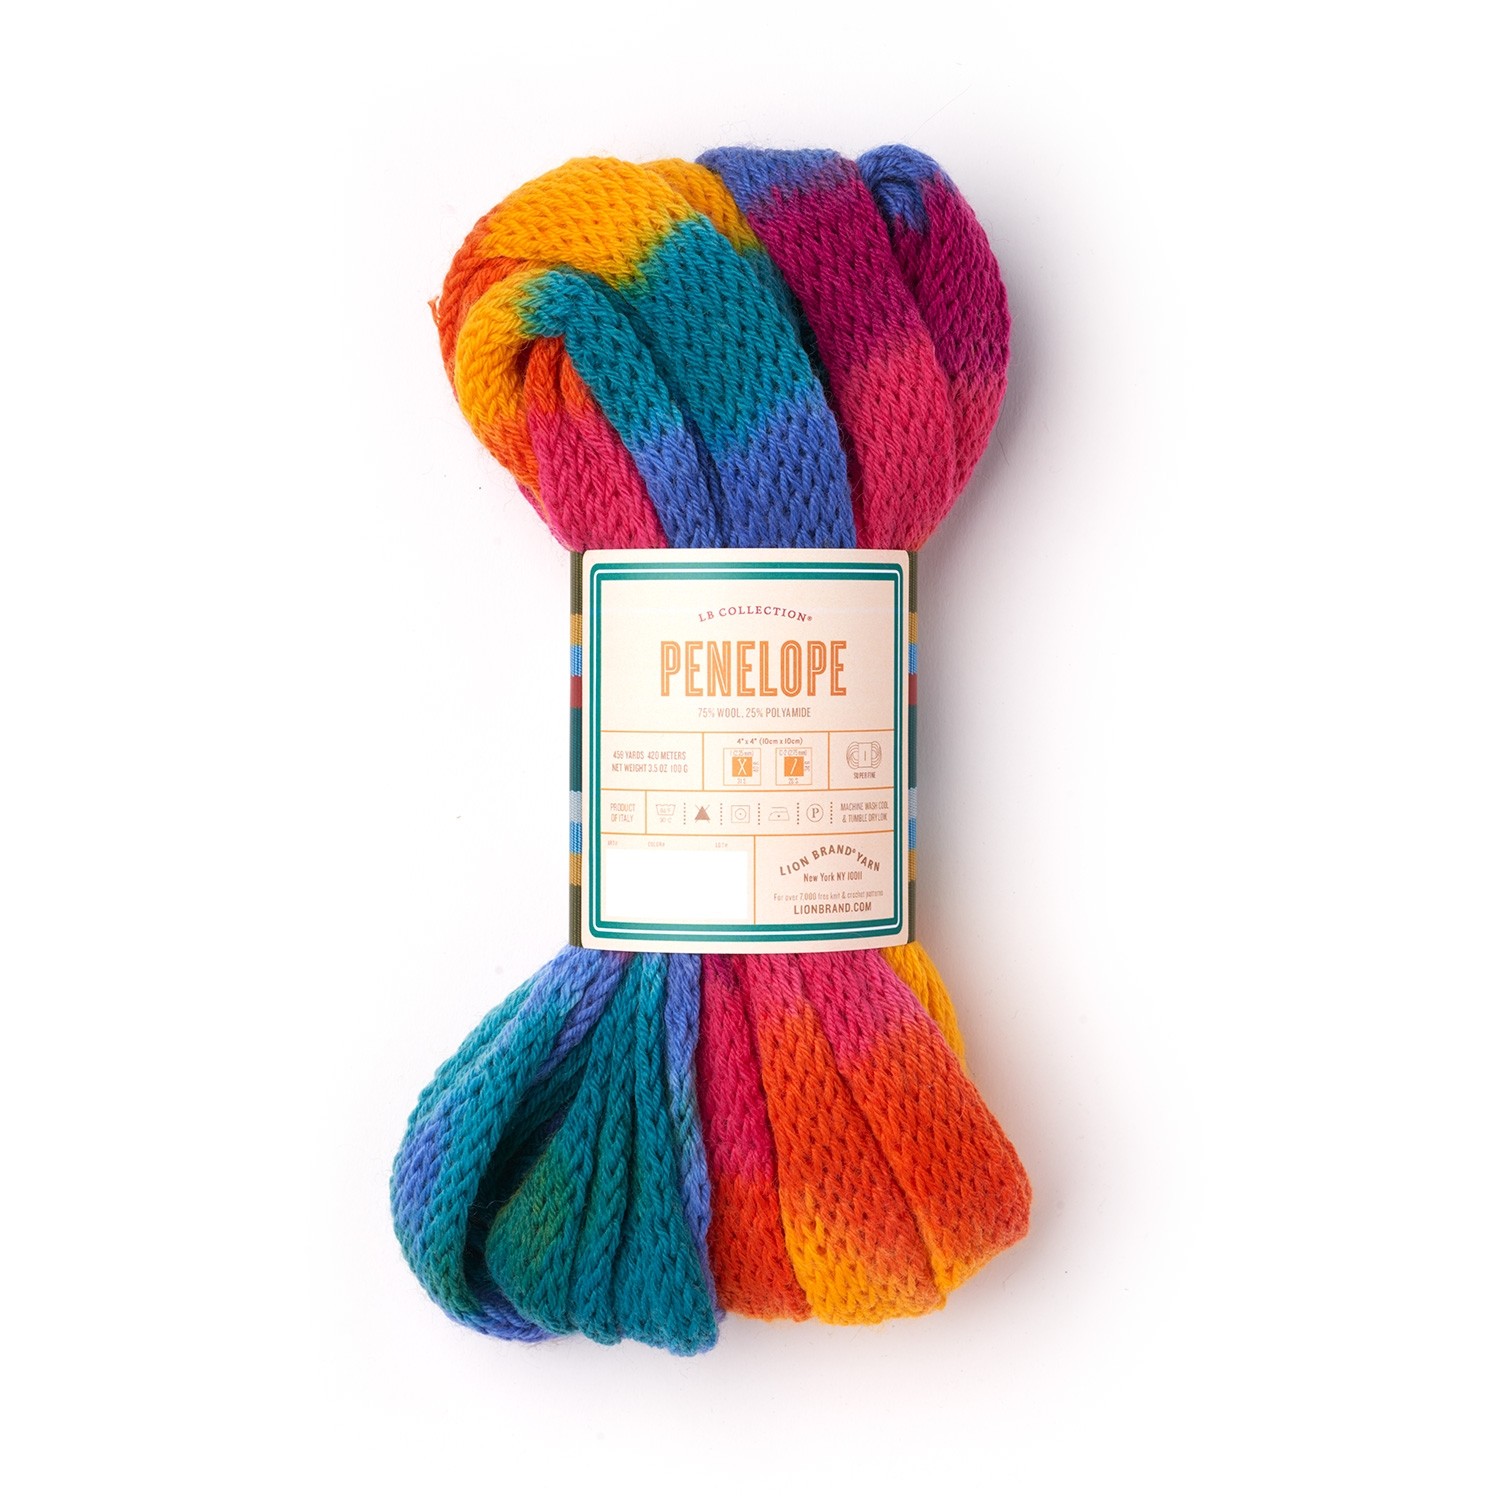 Meet Penelope: Our New Superfine Yarn, Perfect for Making Socks